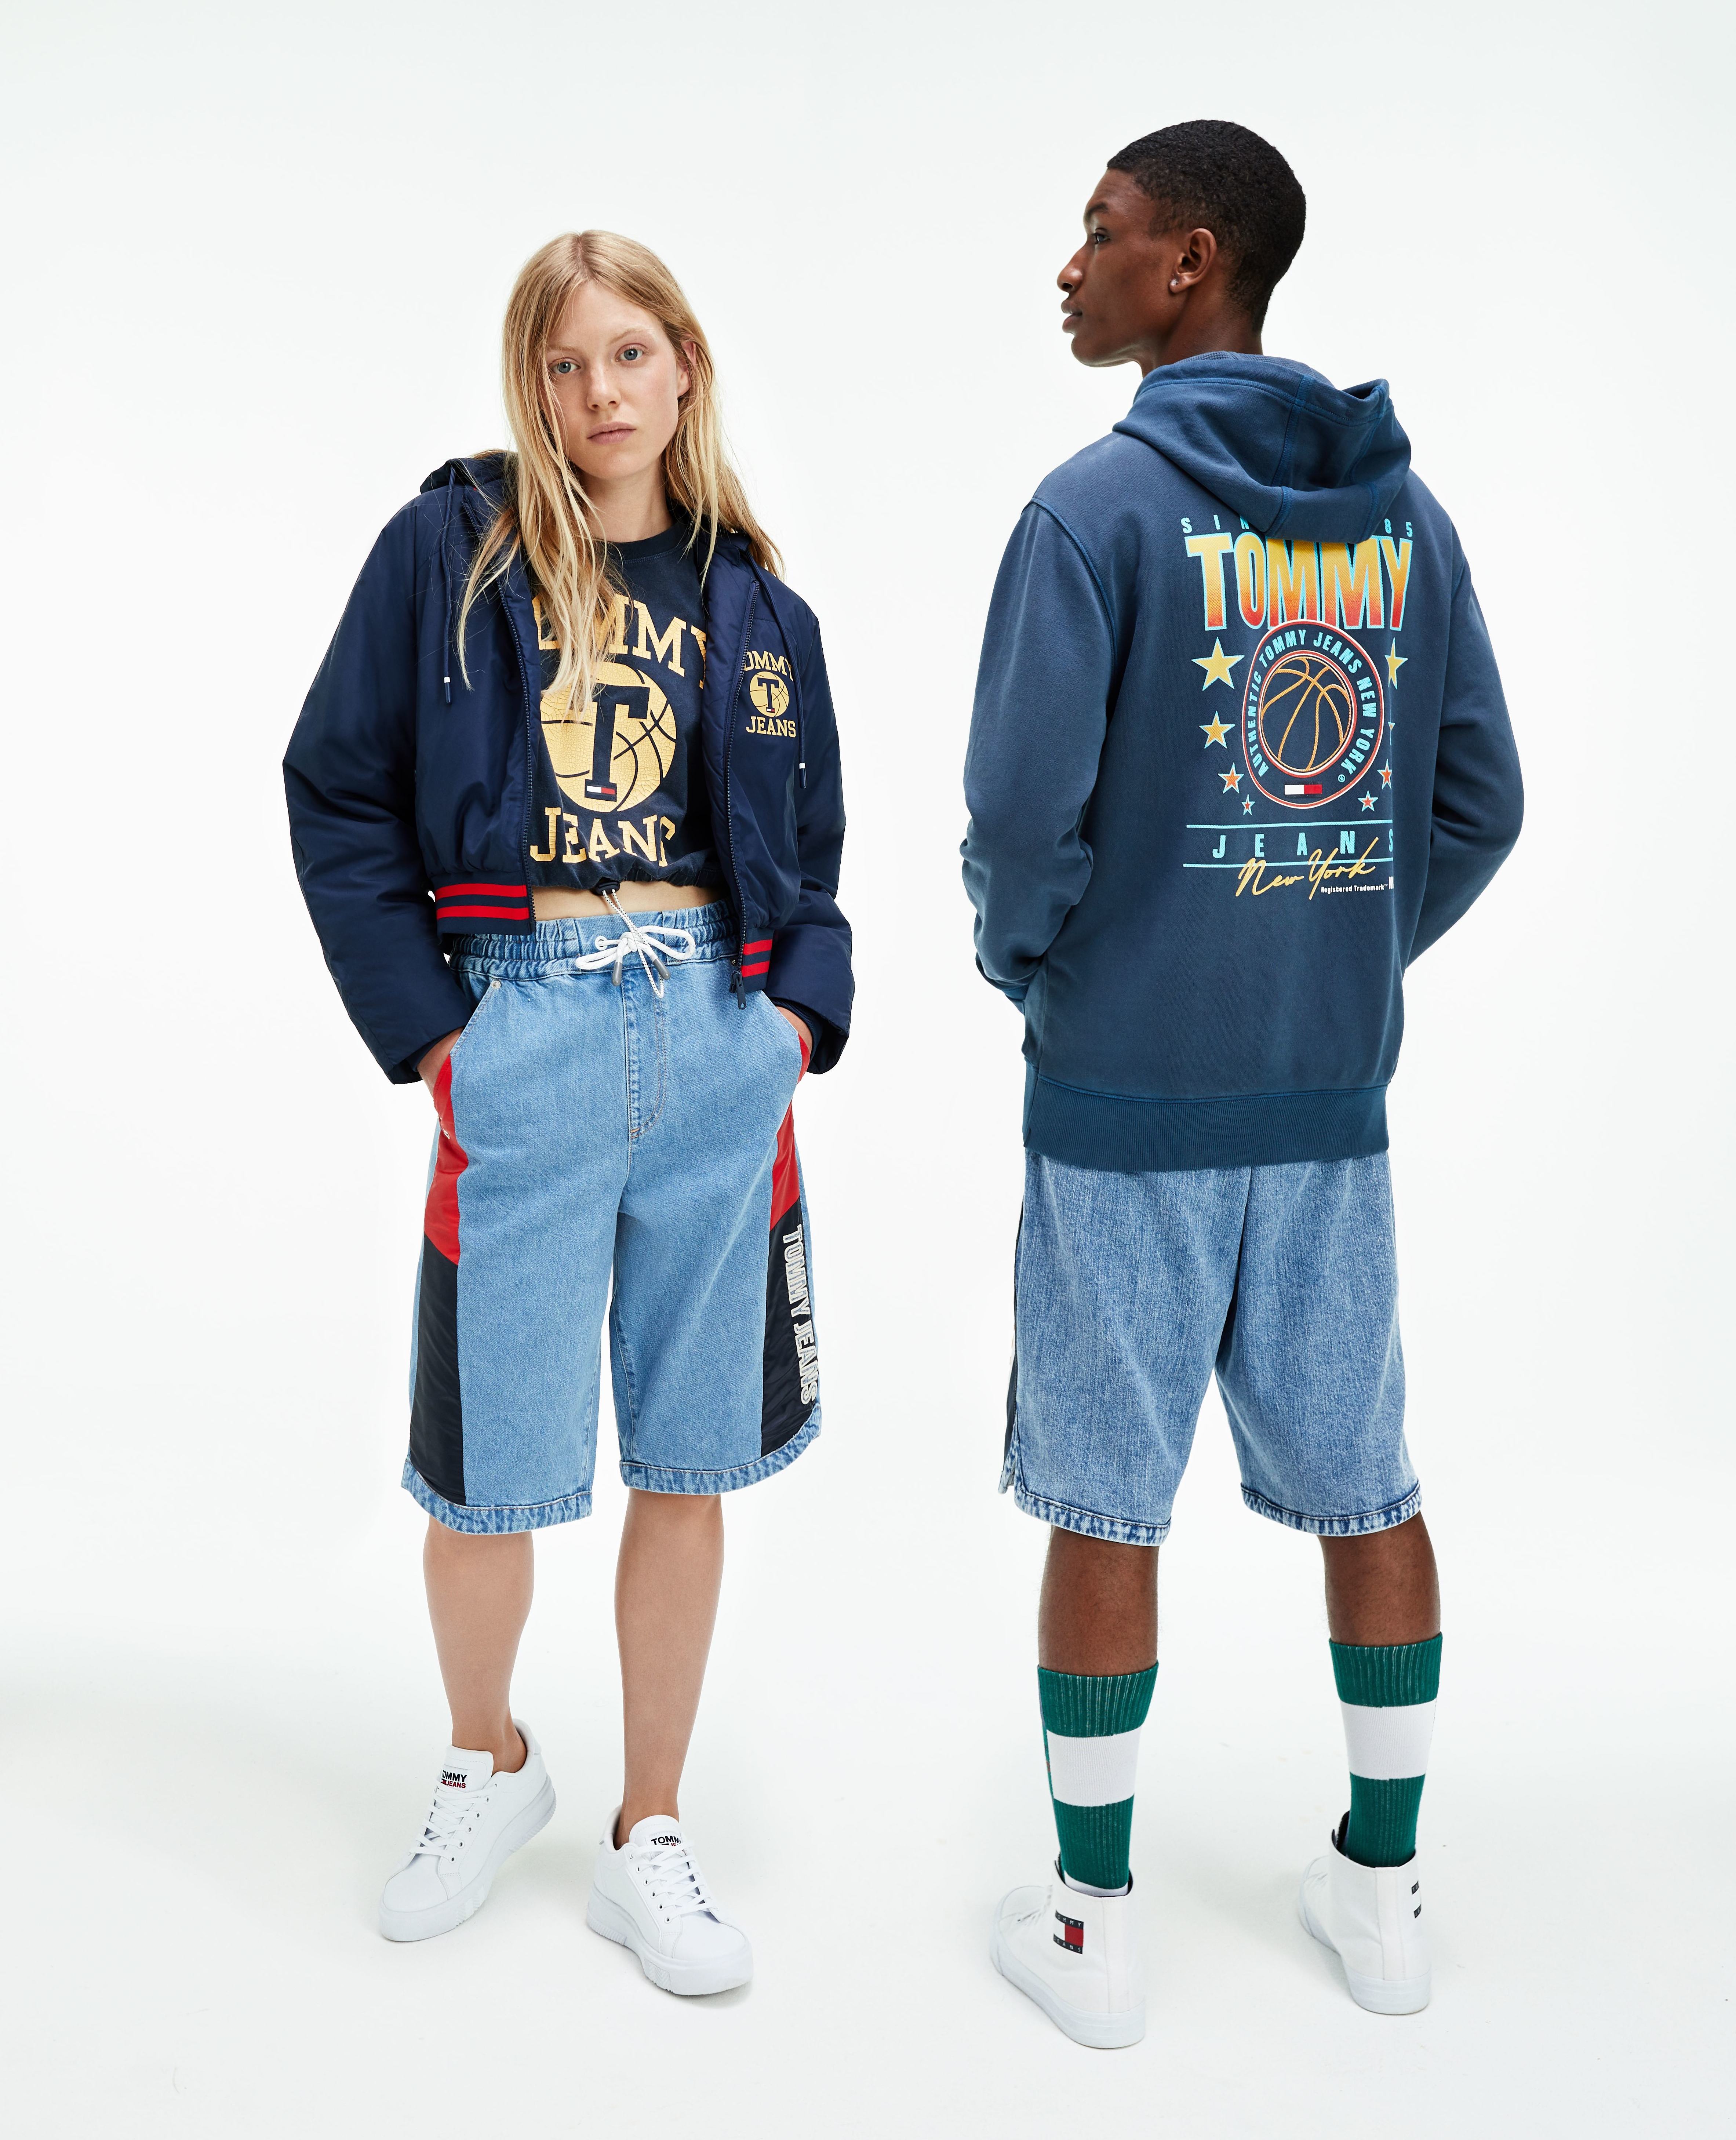 Tommy Jeans Spring 2021